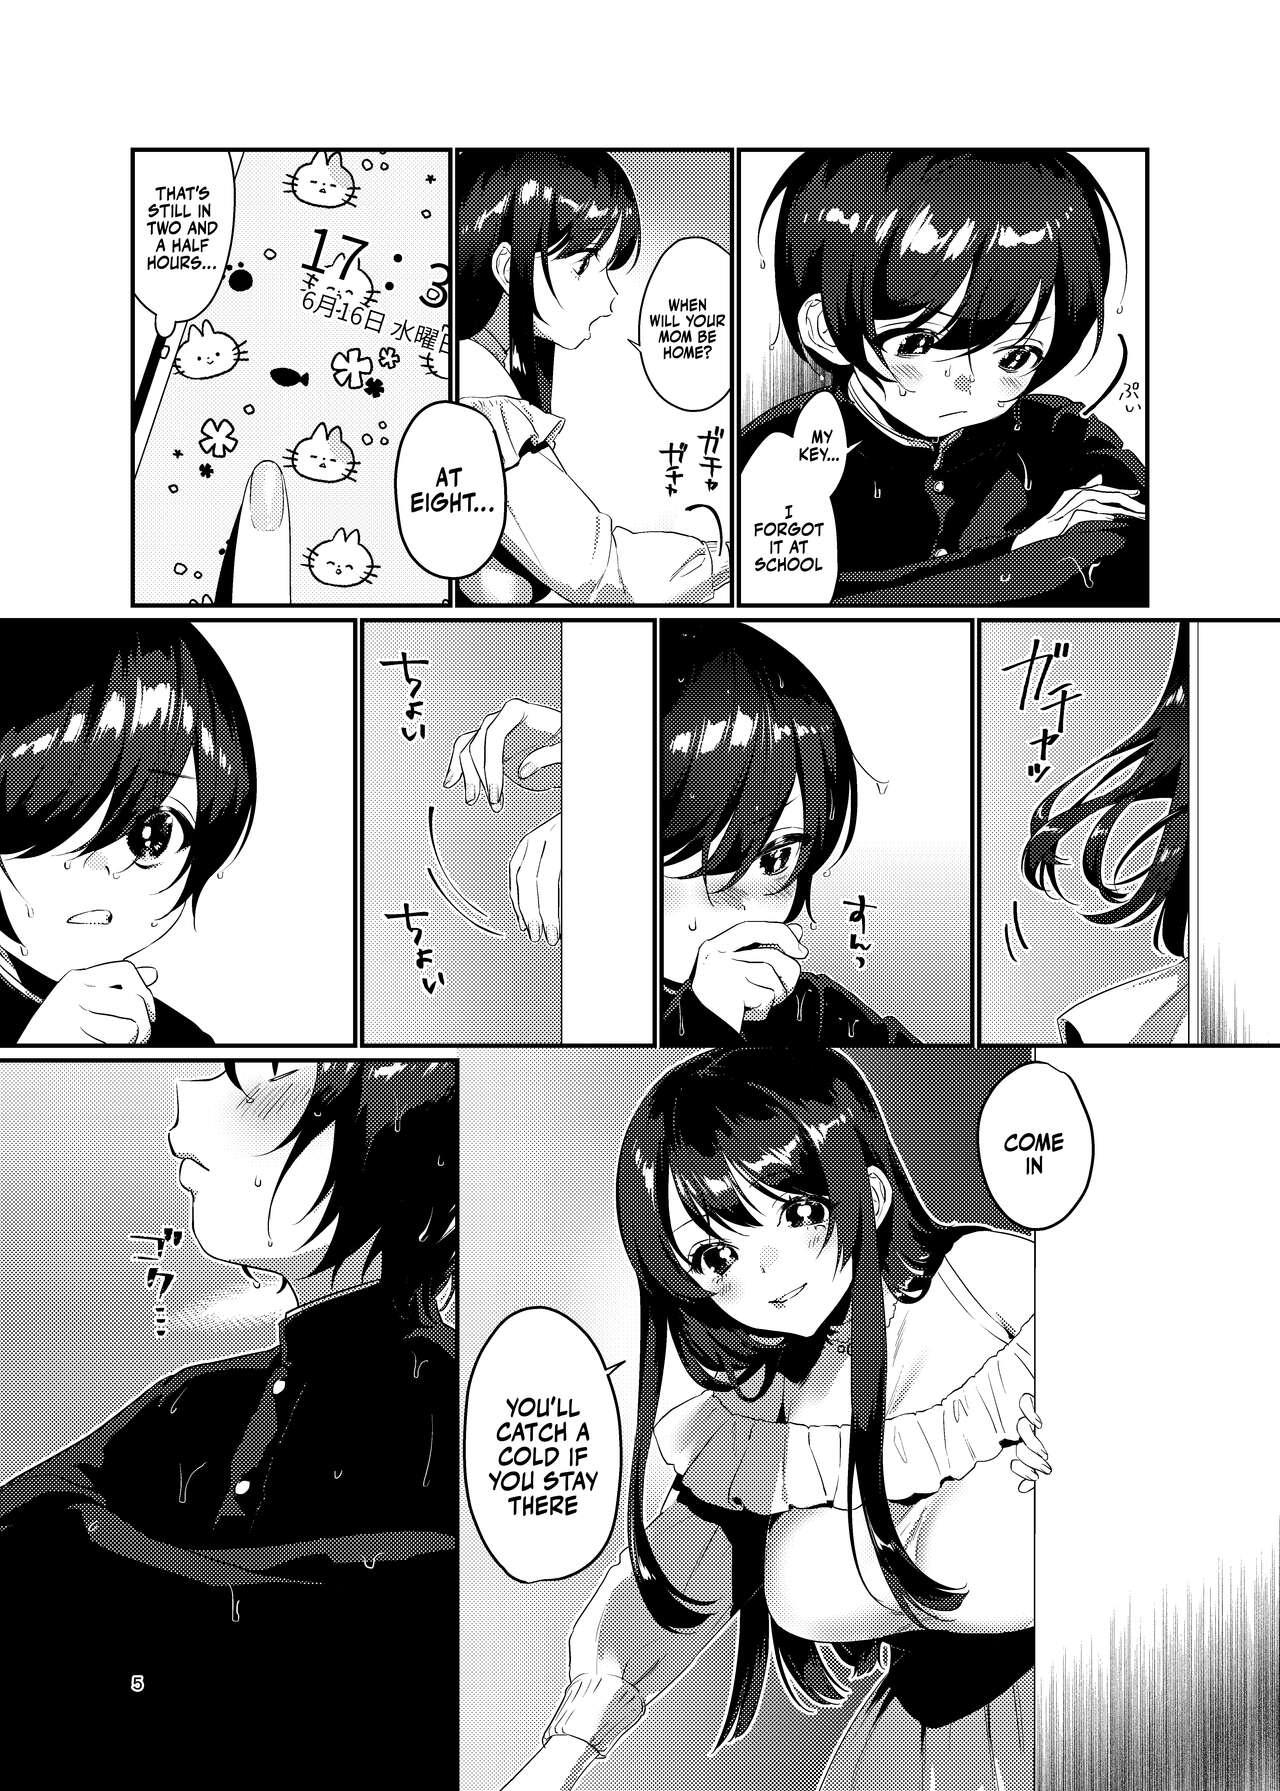 Best Blowjobs Ame, Nochi to Nari no Onee-san | Ame, Later Sister - Original Fellatio - Page 4